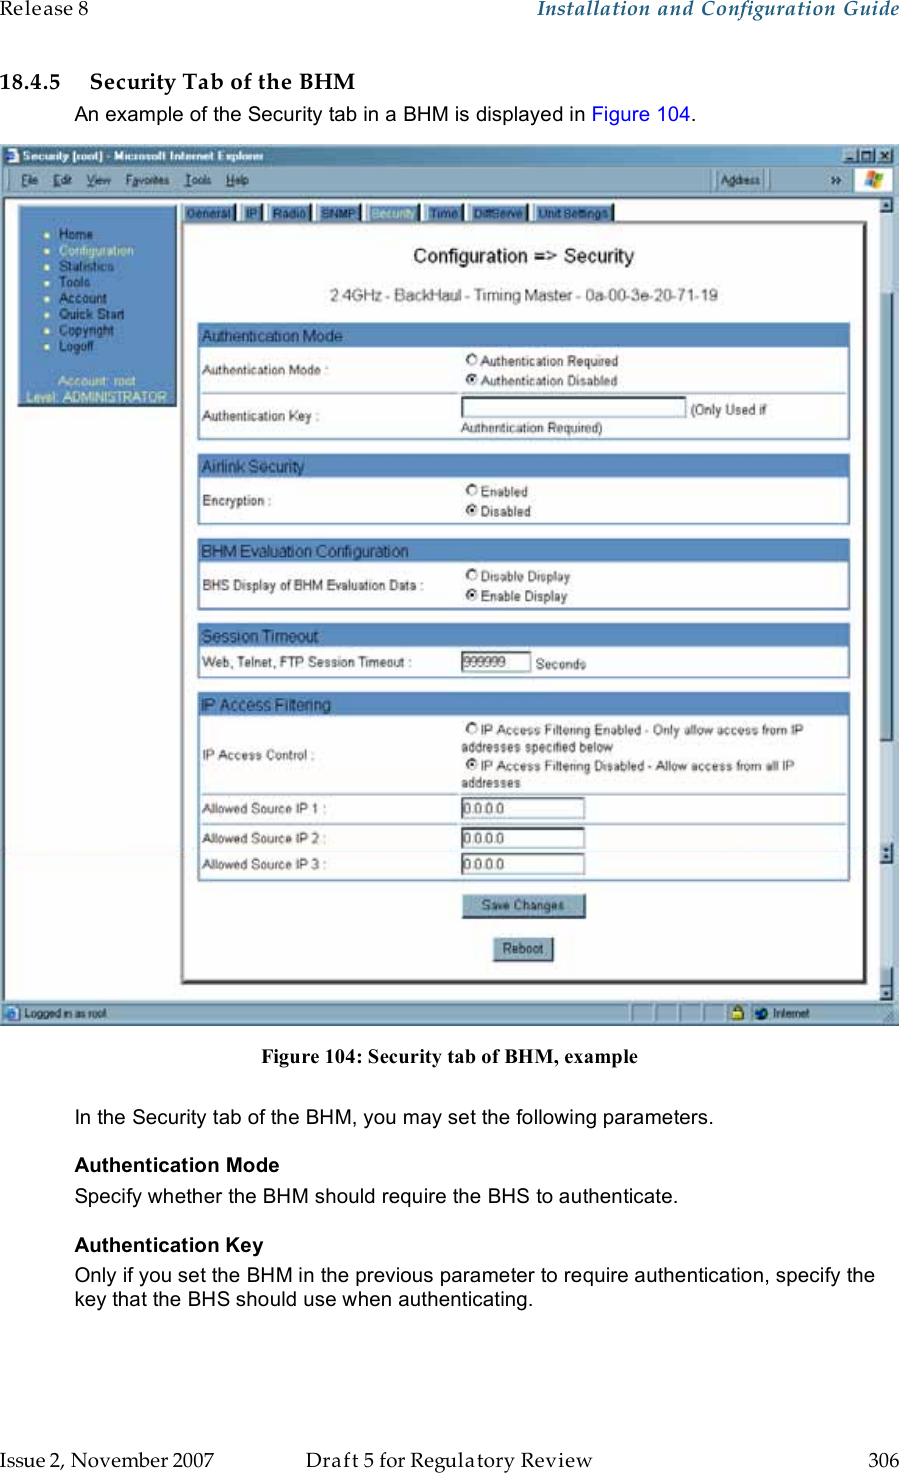 Release 8    Installation and Configuration Guide   Issue 2, November 2007  Draft 5 for Regulatory Review  306     18.4.5 Security Tab of the BHM An example of the Security tab in a BHM is displayed in Figure 104.  Figure 104: Security tab of BHM, example  In the Security tab of the BHM, you may set the following parameters. Authentication Mode Specify whether the BHM should require the BHS to authenticate. Authentication Key Only if you set the BHM in the previous parameter to require authentication, specify the key that the BHS should use when authenticating.  